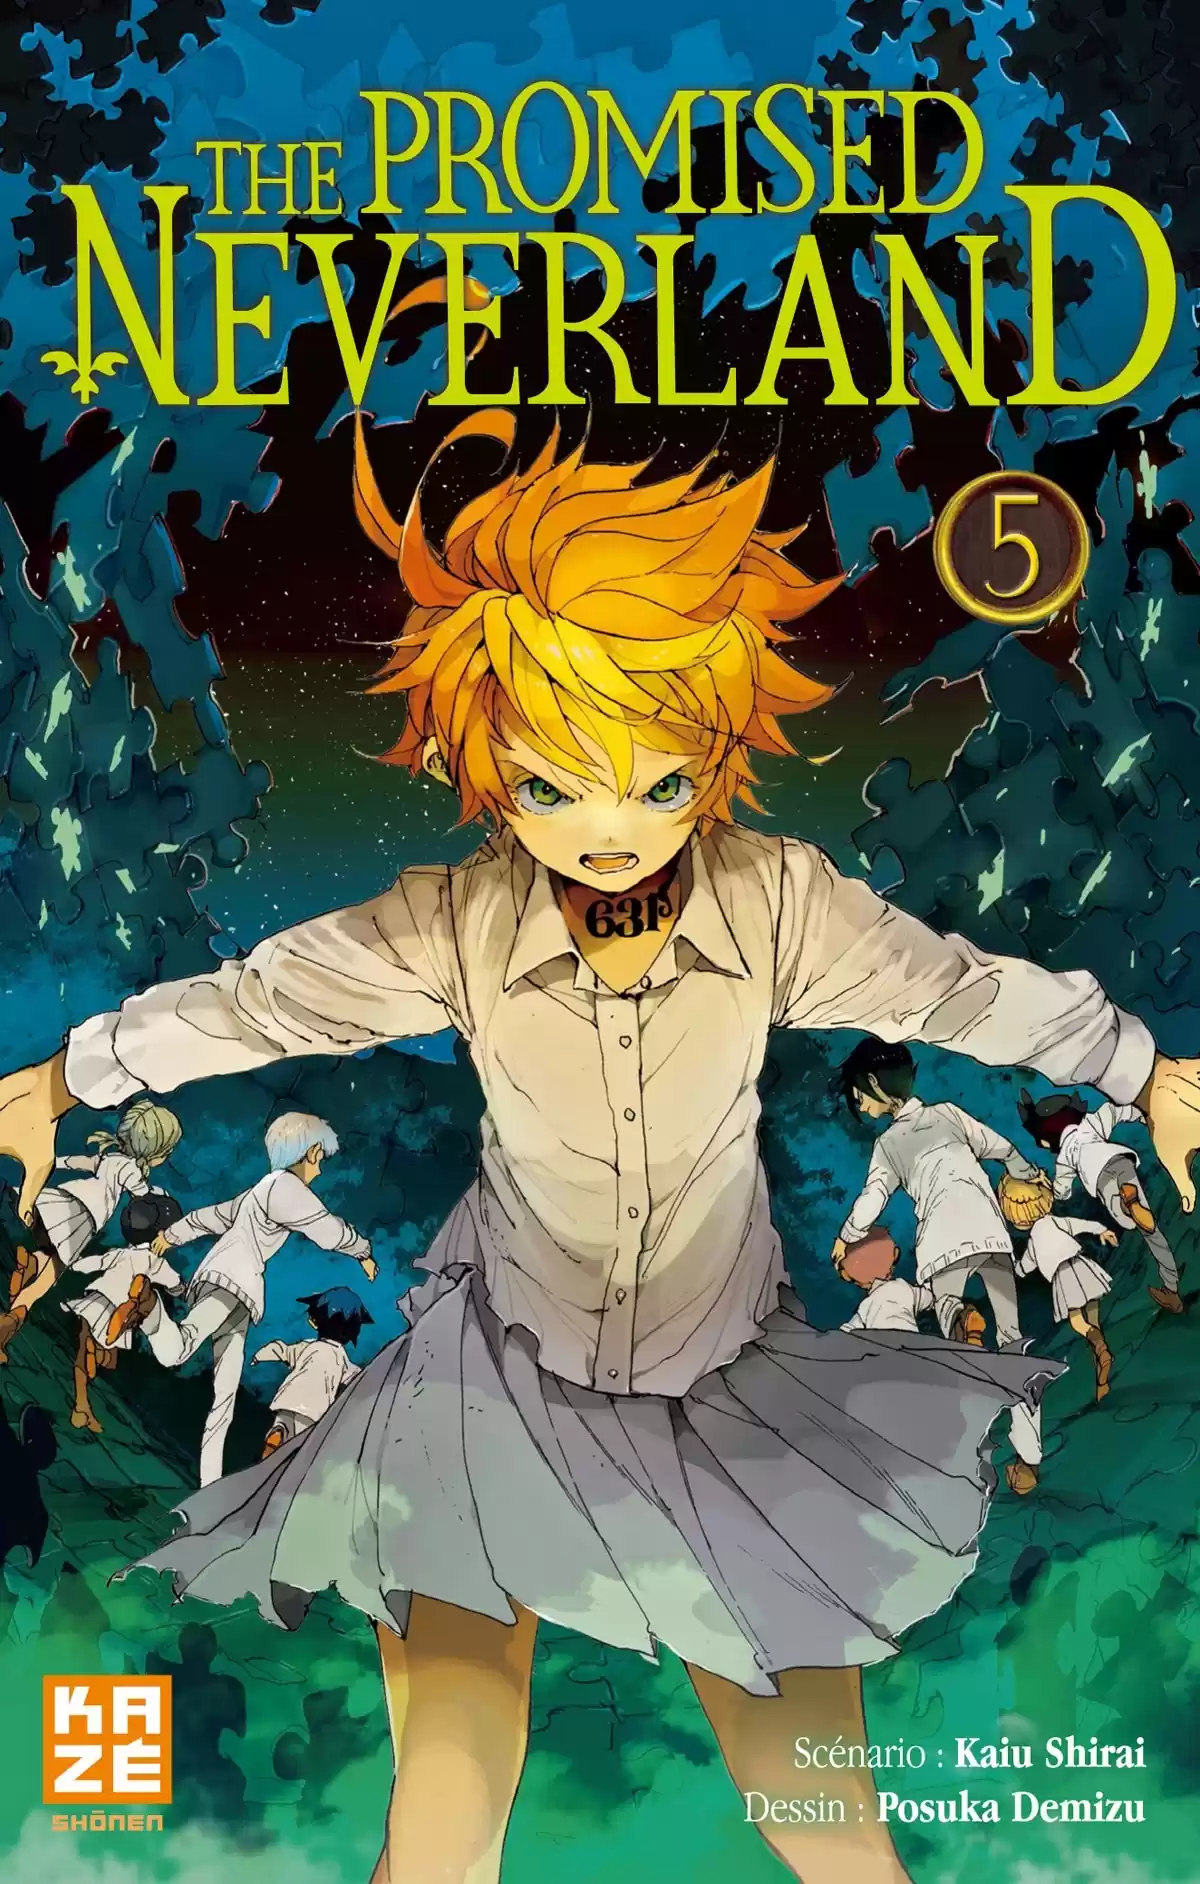 The Promised Neverland Volume 5 page 1